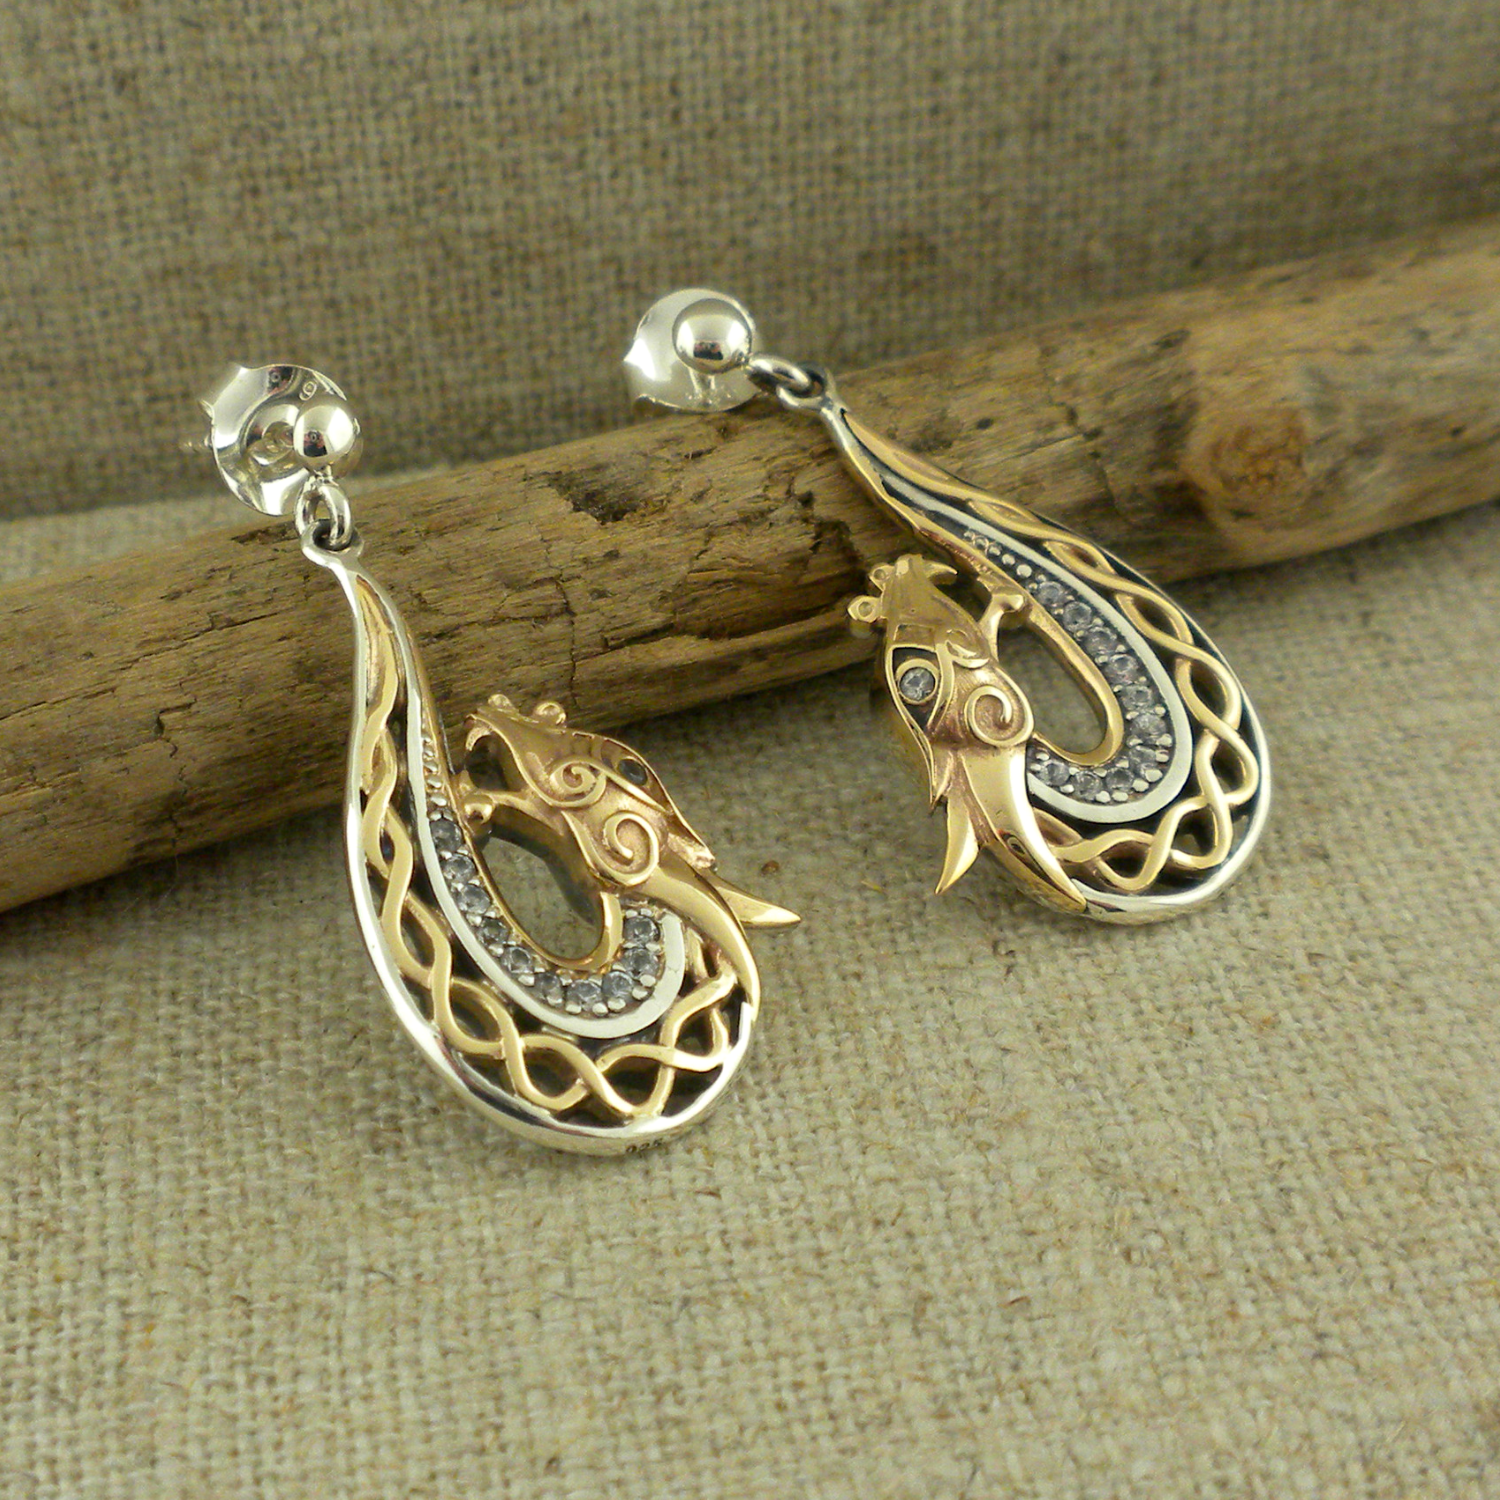 Dragon Earrings with White Sapphires